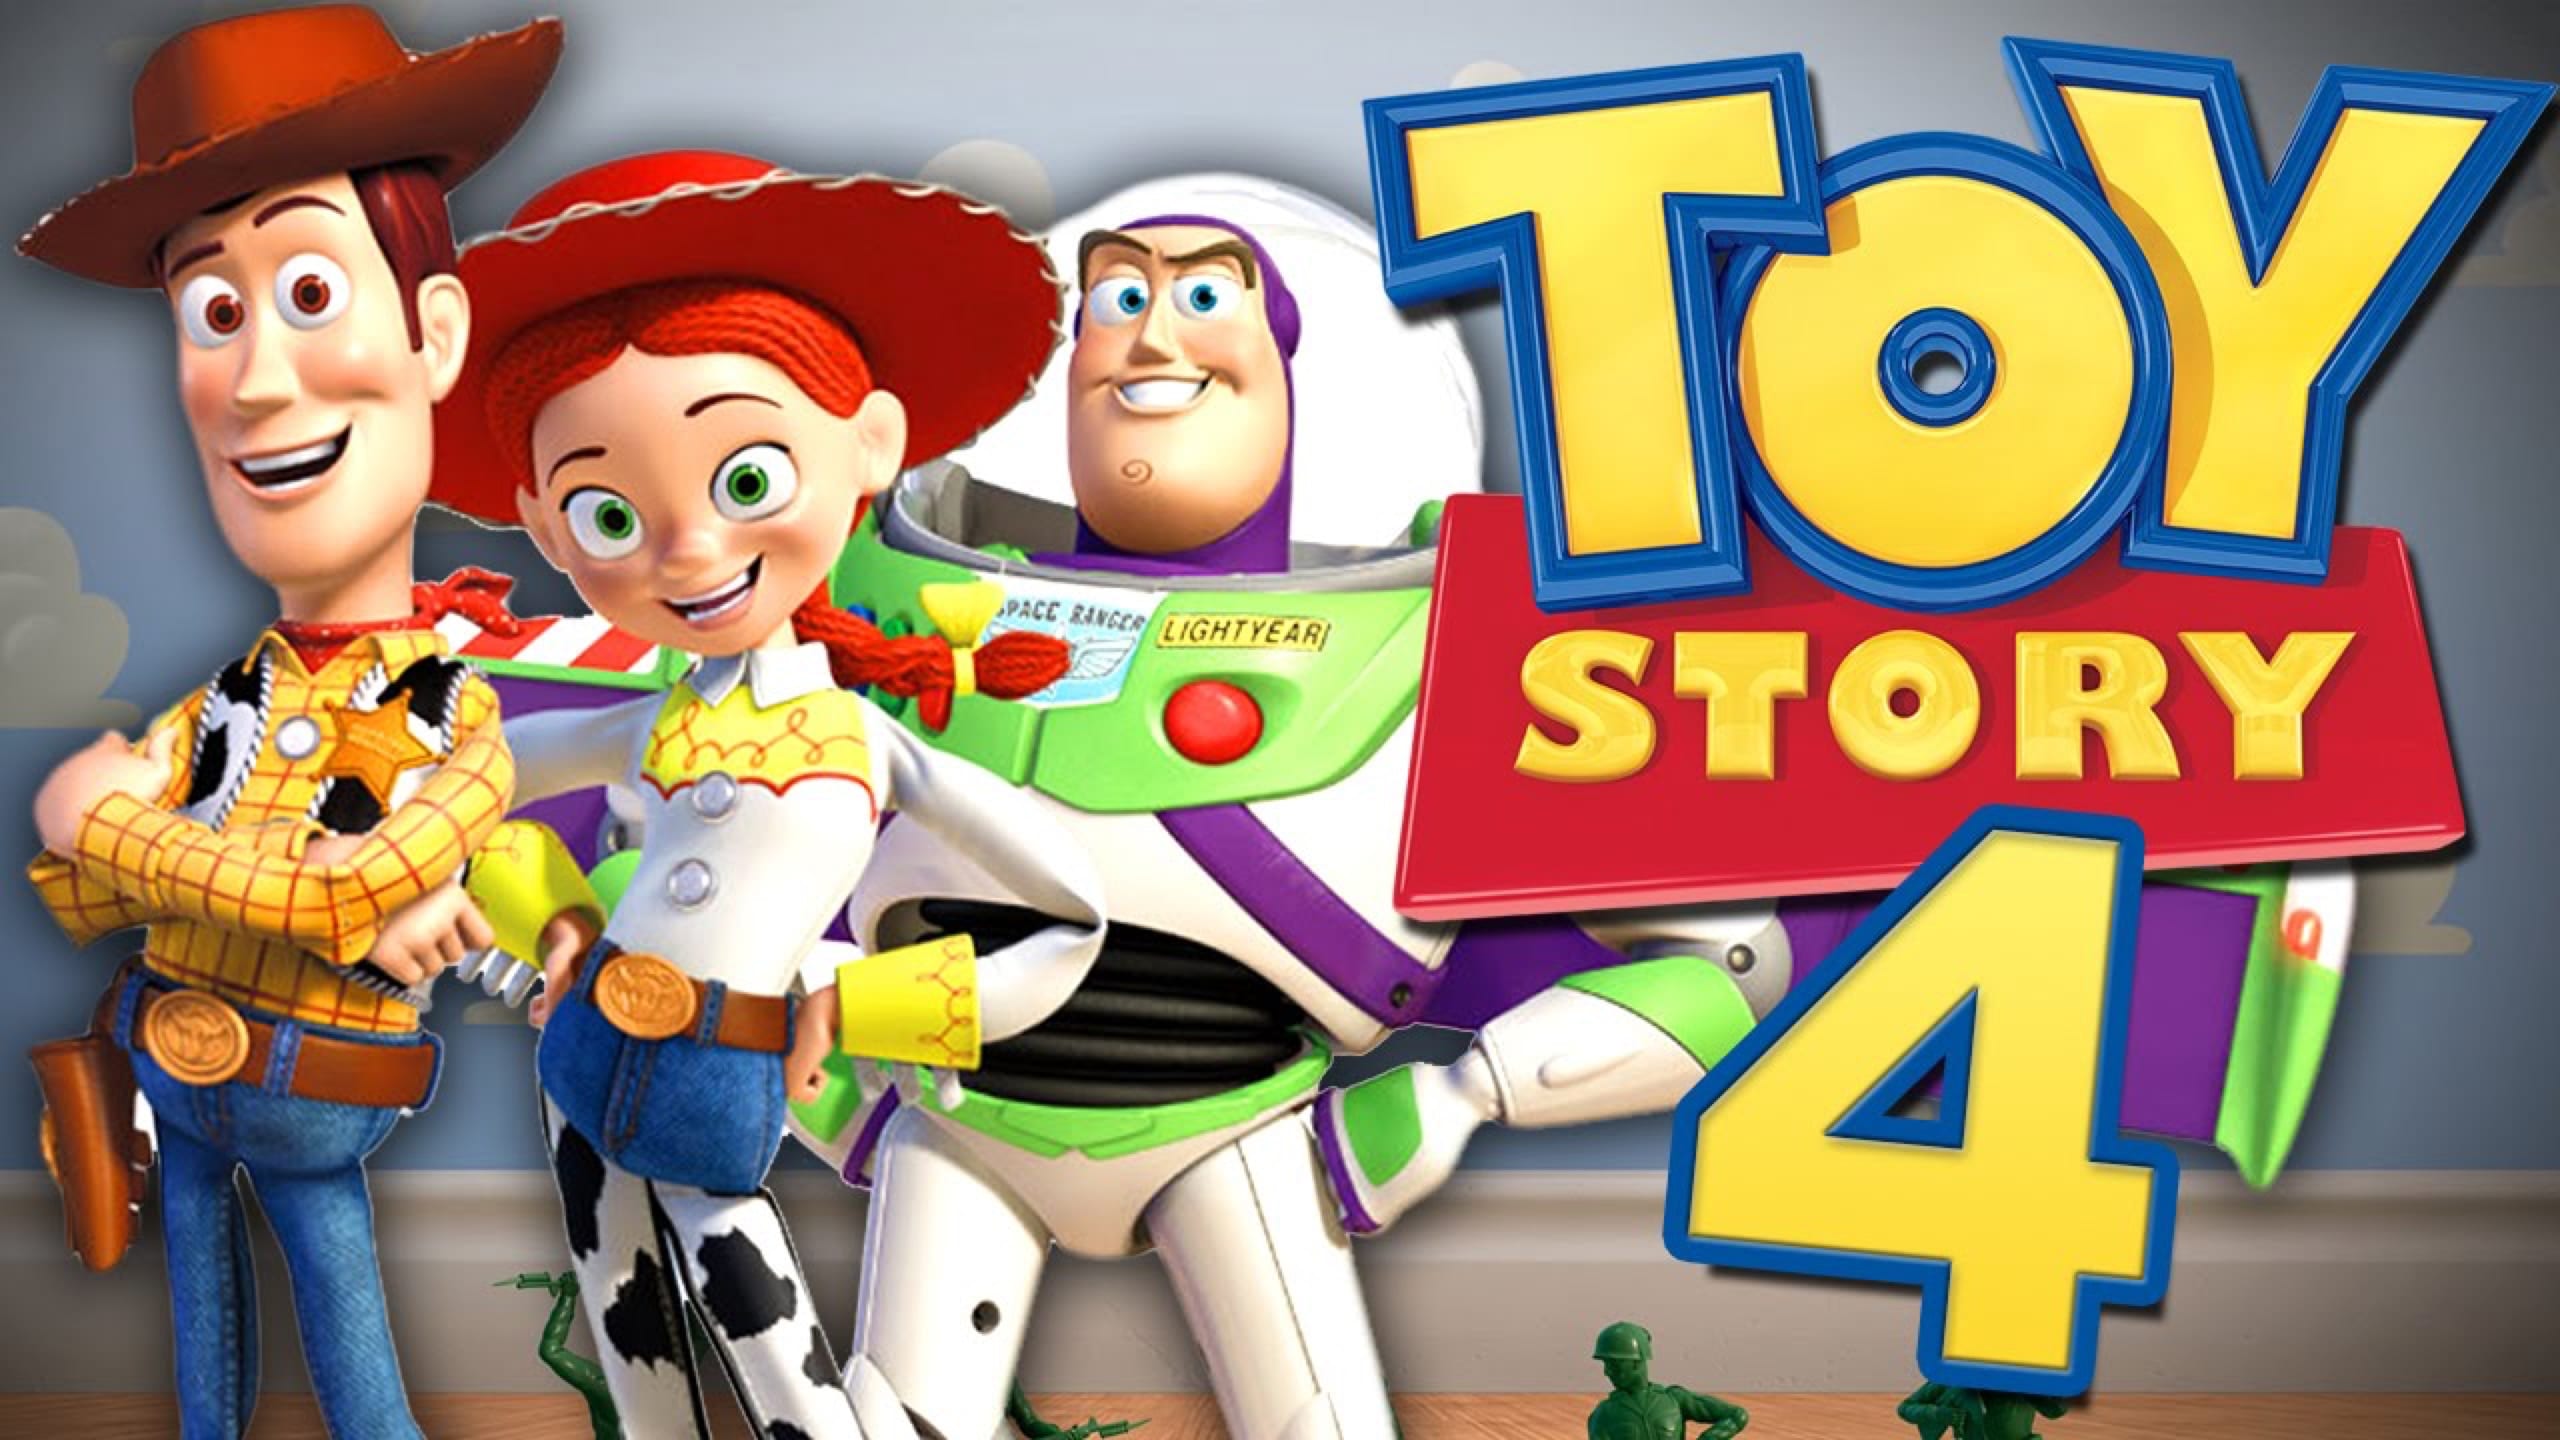 ‘Toy Story 4’ Trailer Released!